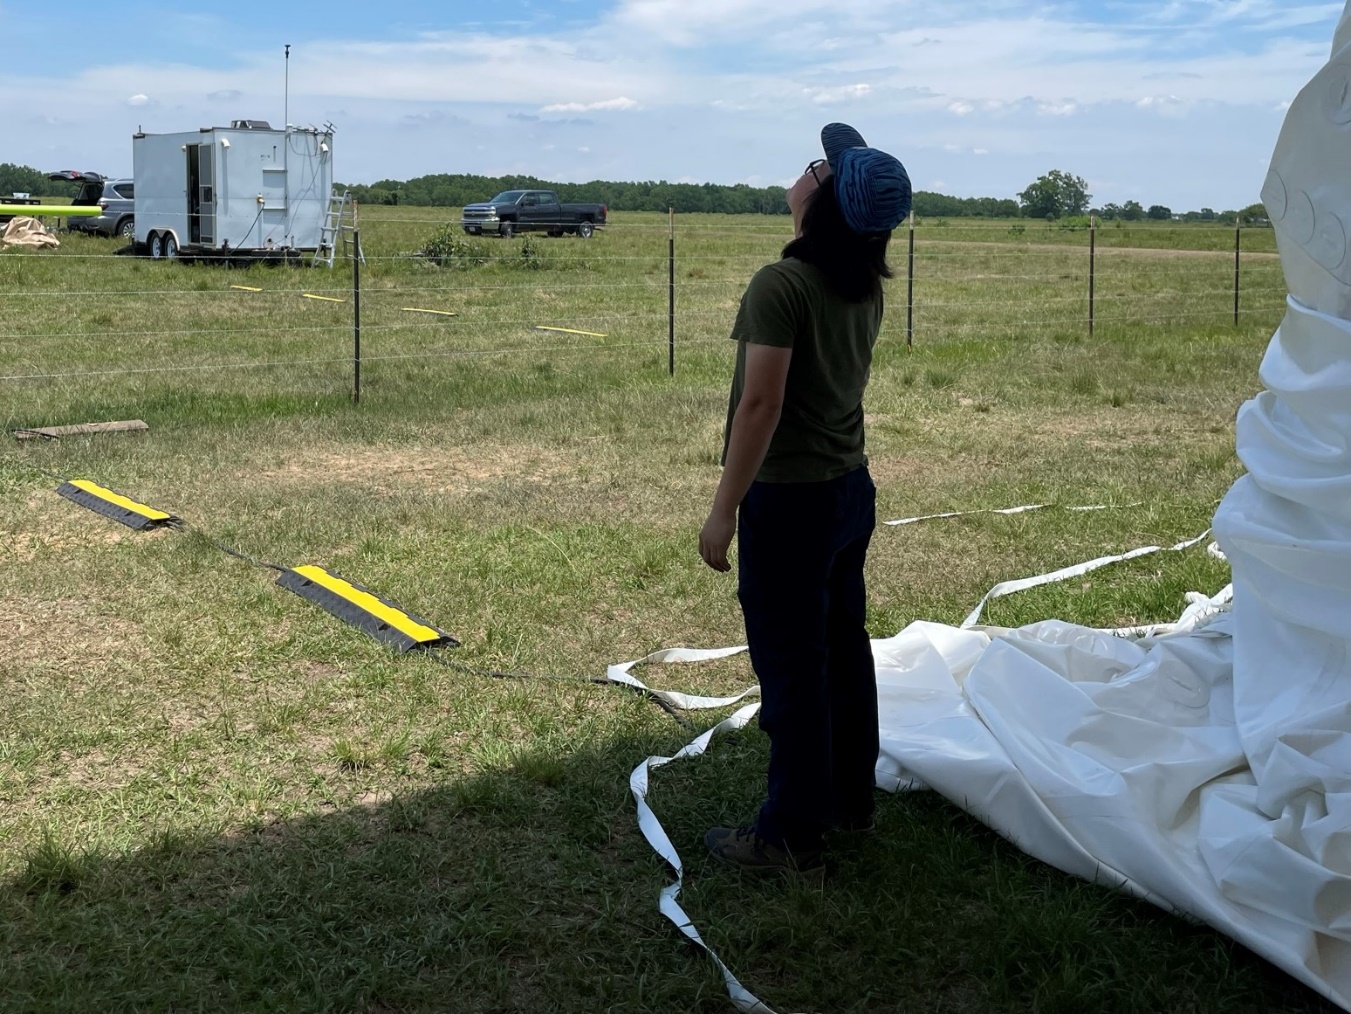 In July 2022, from the shade of a tethered balloon shelter in Guy, Brookhaven National Laboratory scientist Chongai Kuang watches one of his aerosol instruments borne aloft on a tethered balloon system.